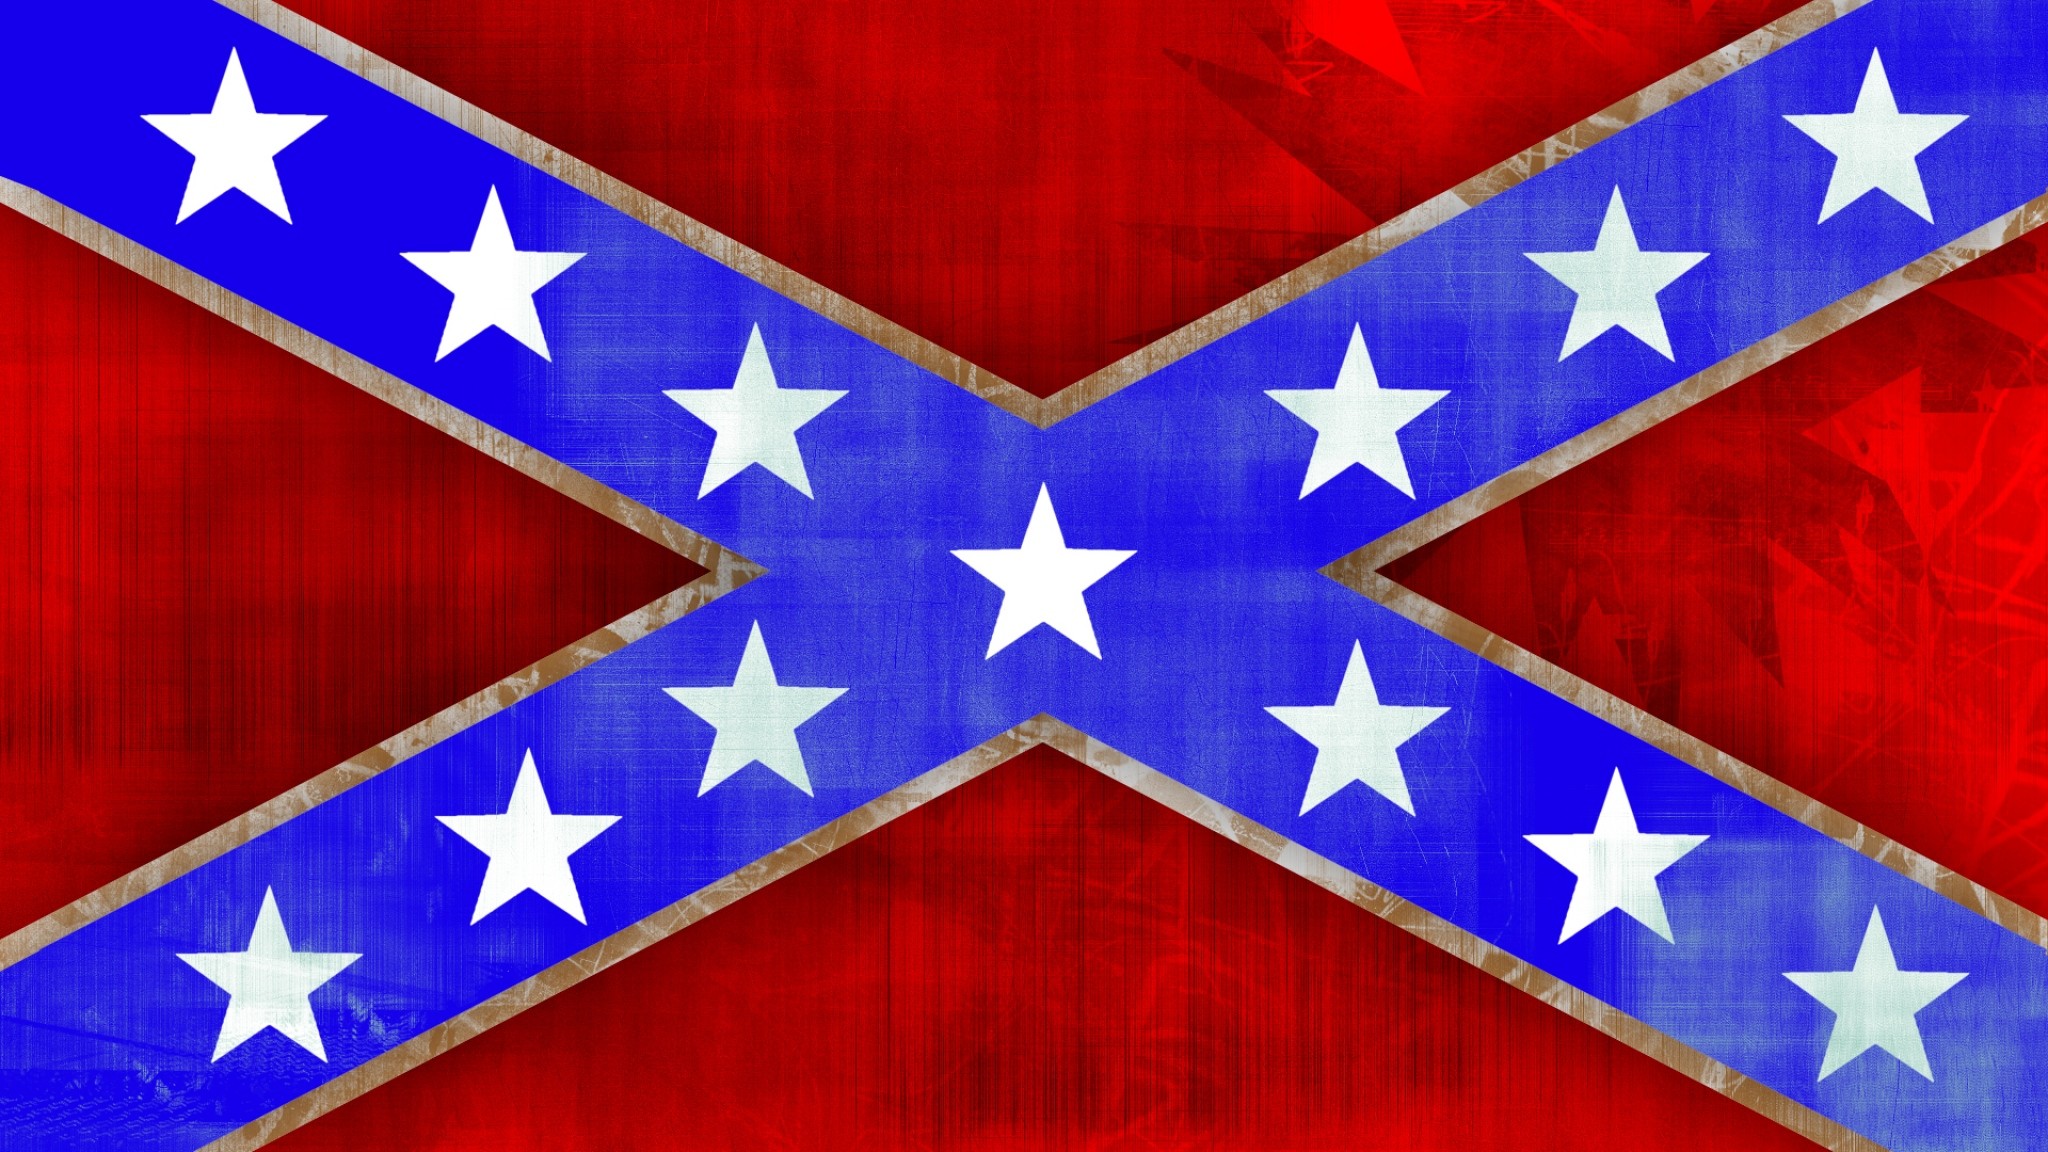 Confederate Flag Wallpaper For IPhone.